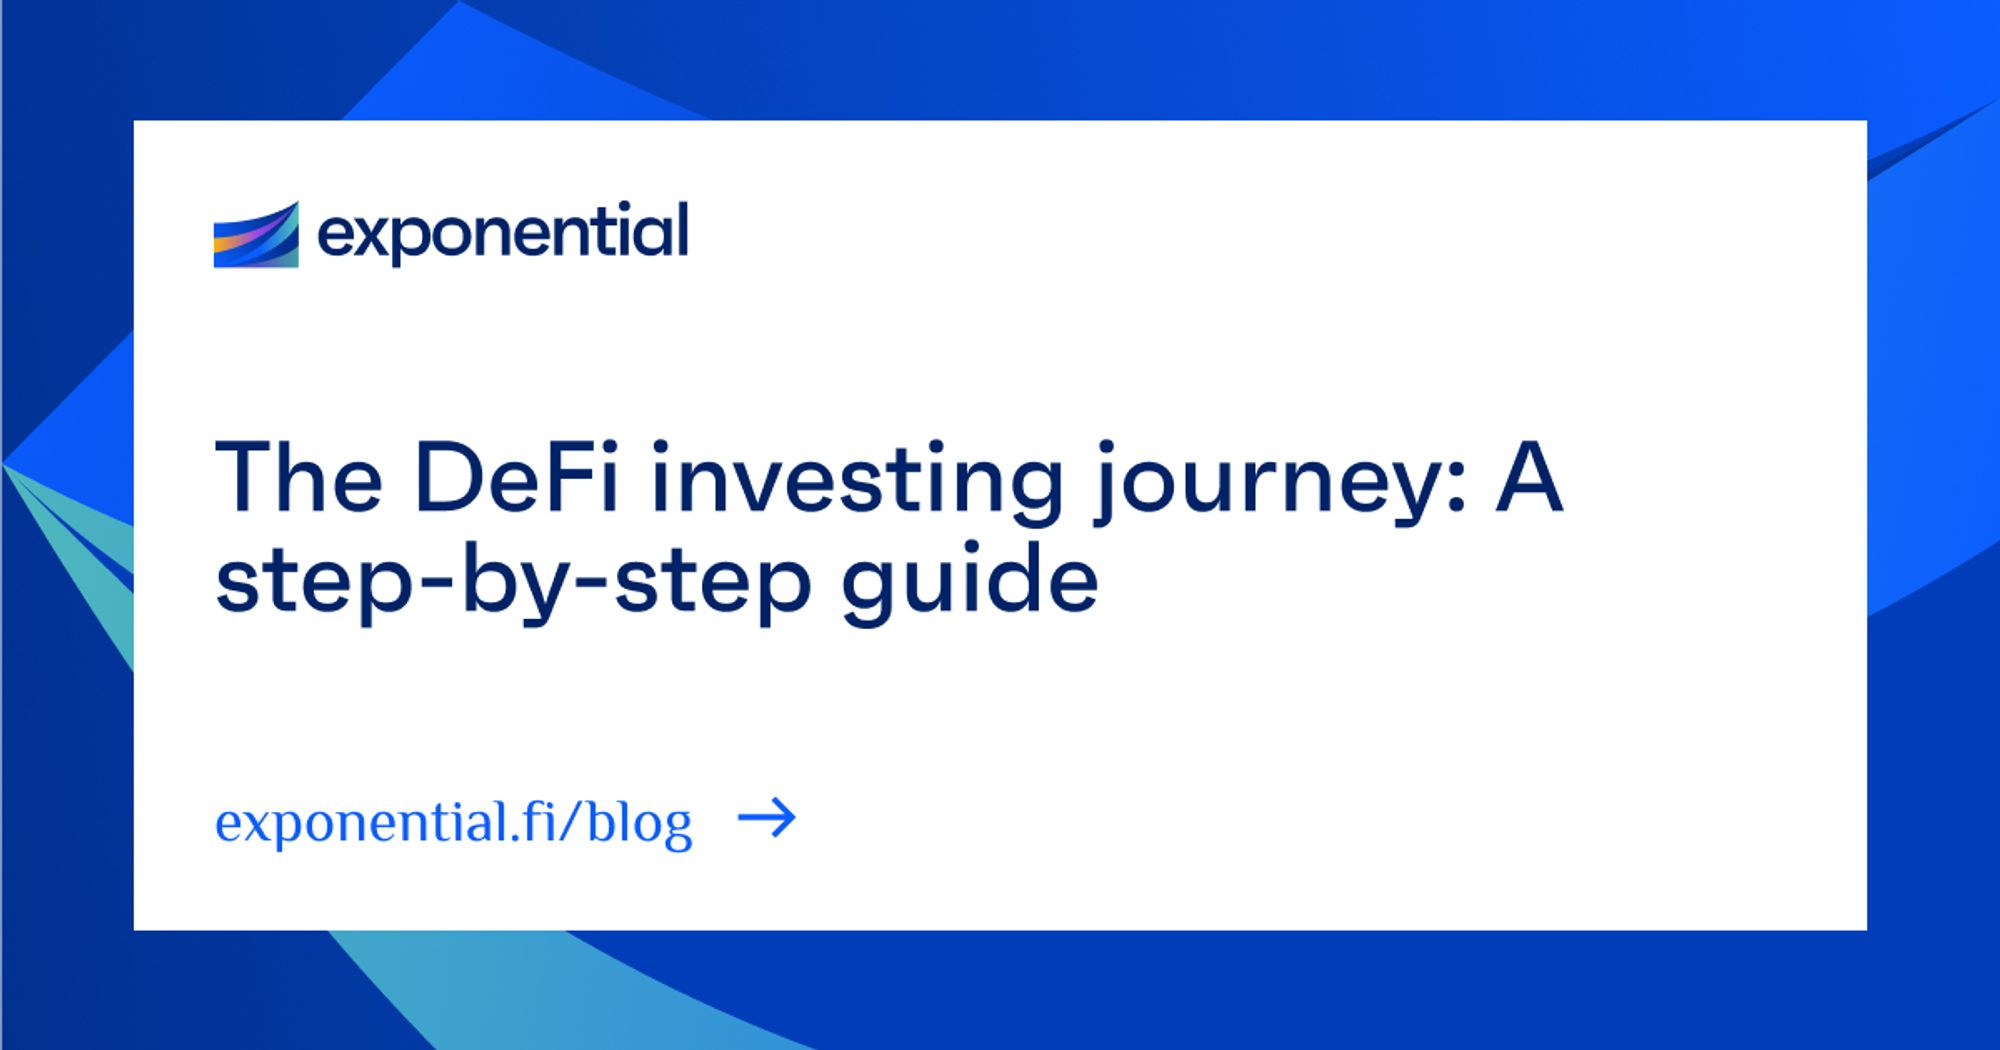 The DeFi investing journey: A step-by-step guide blog cover image